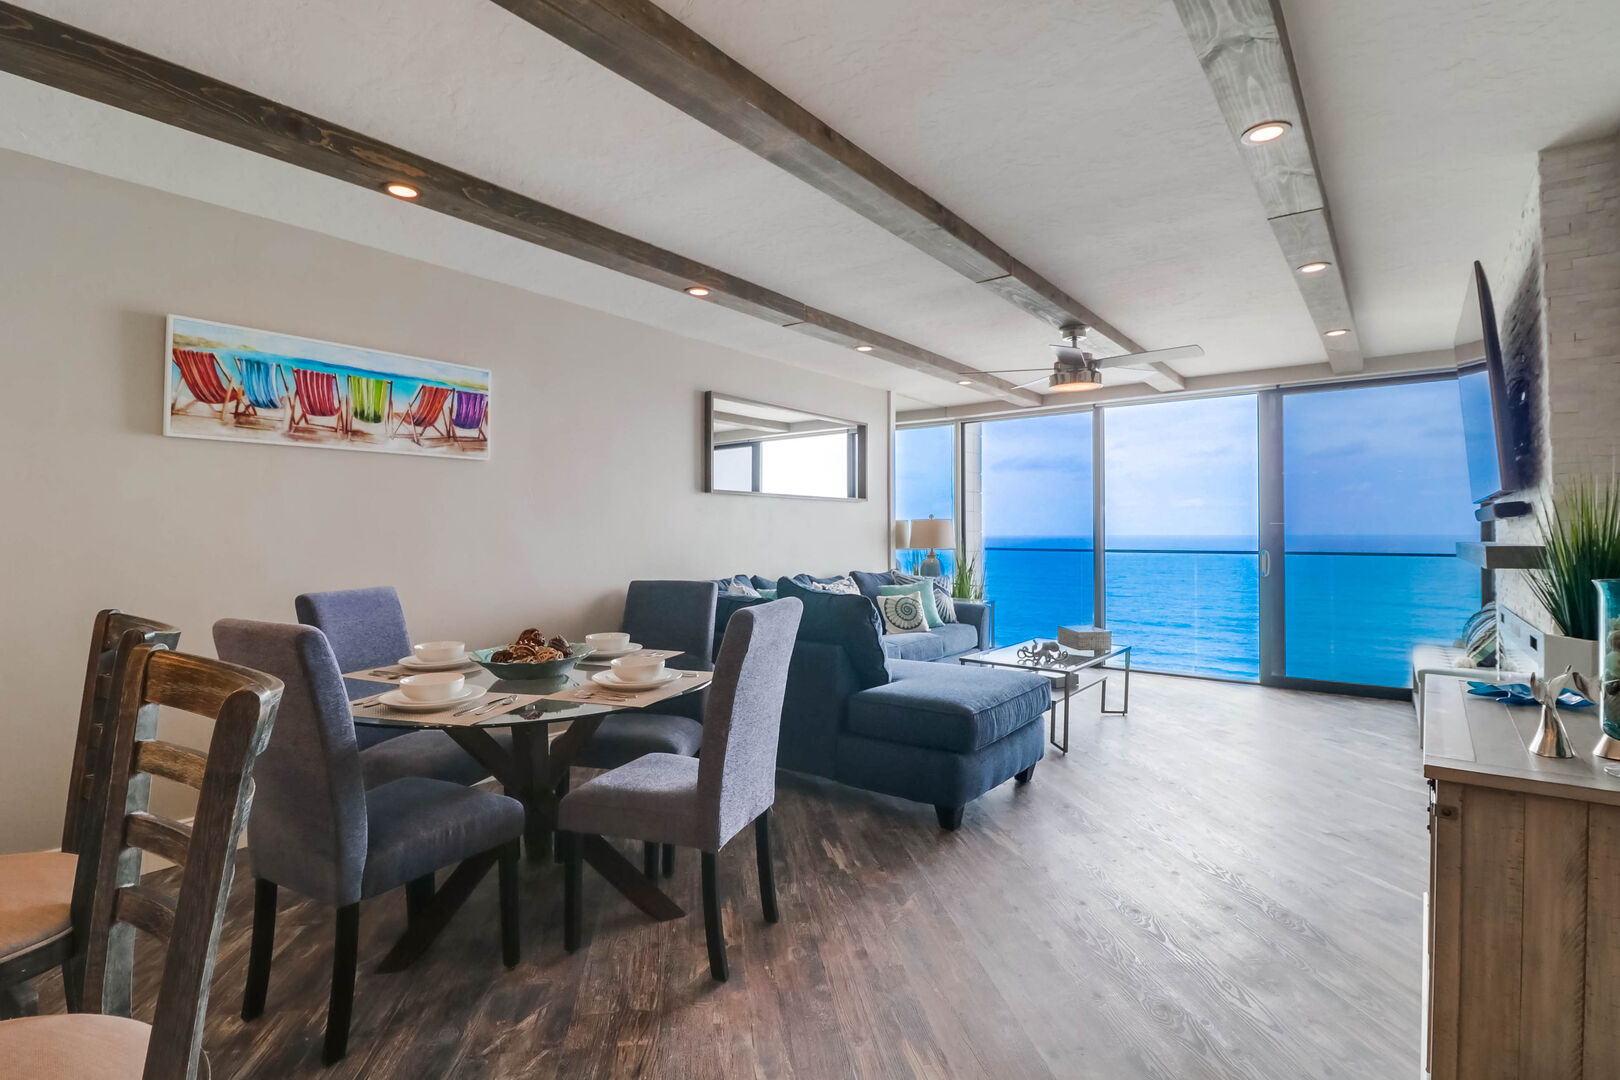 Open floor plan with dining area for 4, living room, kitchen and ocean views